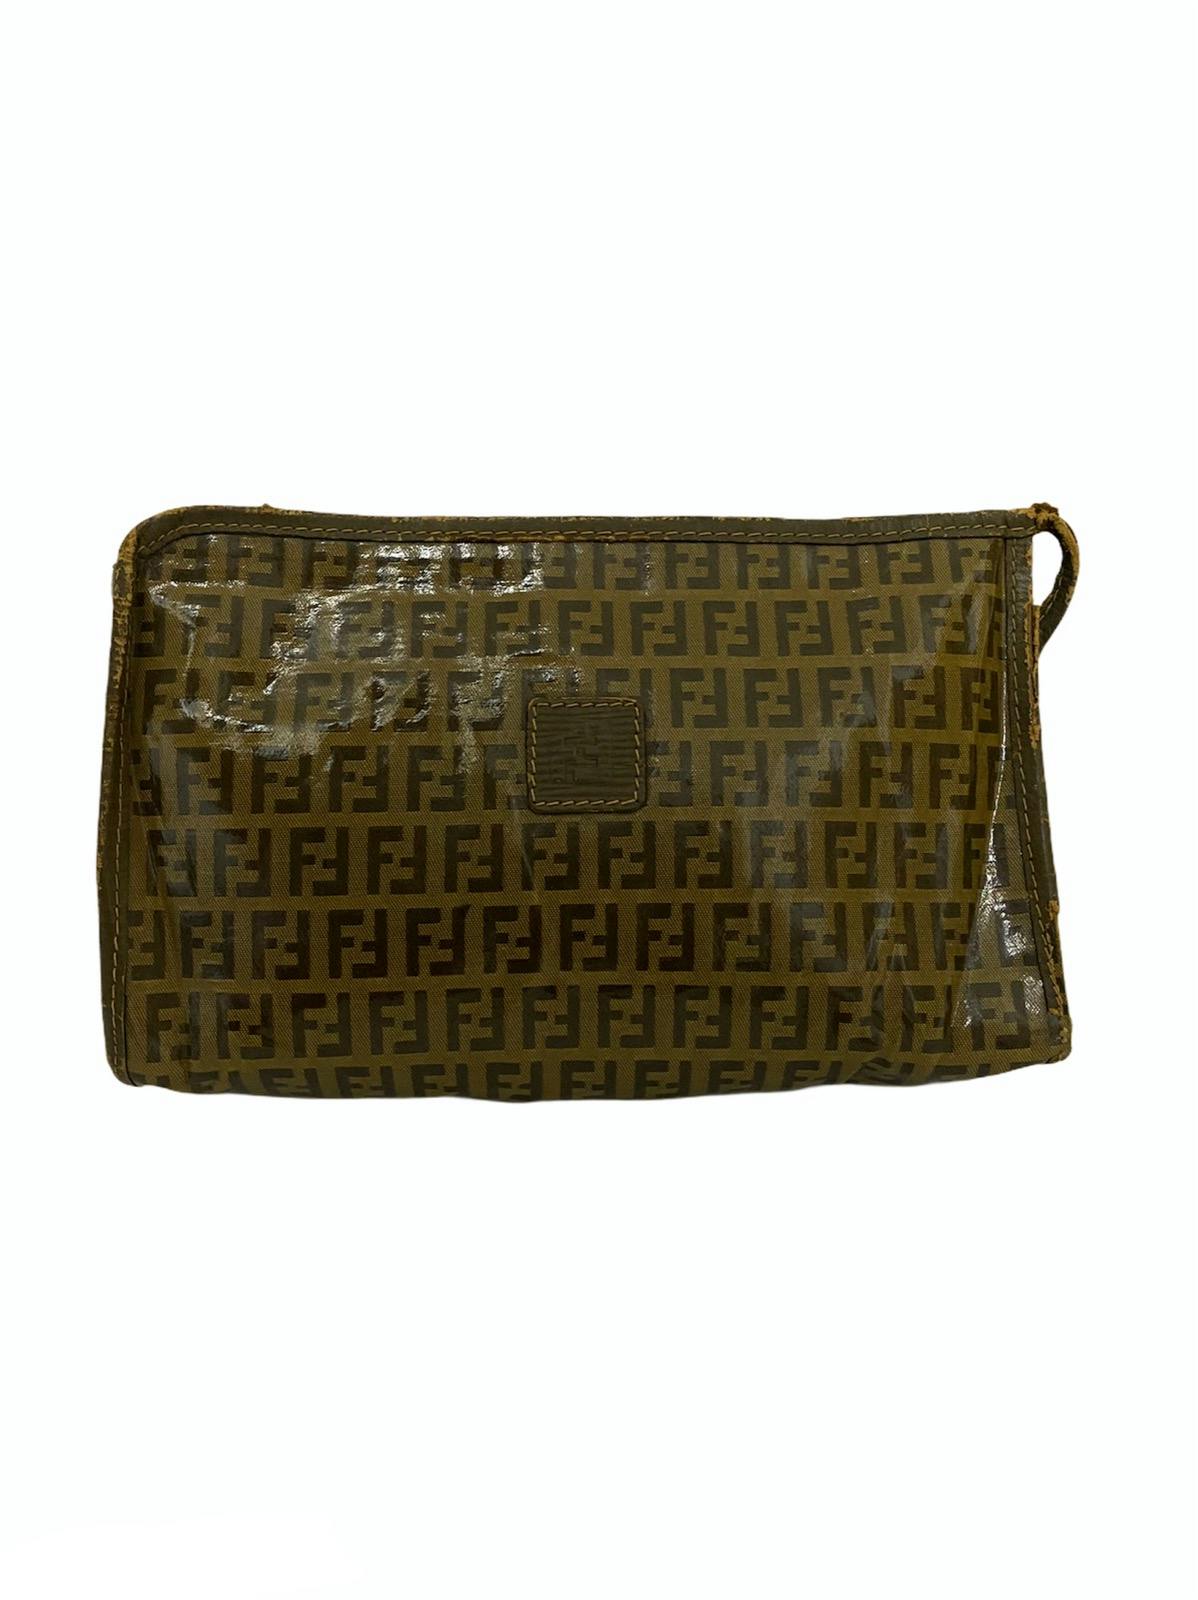 Vintage FENDI Zucca Roma SAS Clutch Bag Made in Italy - 1